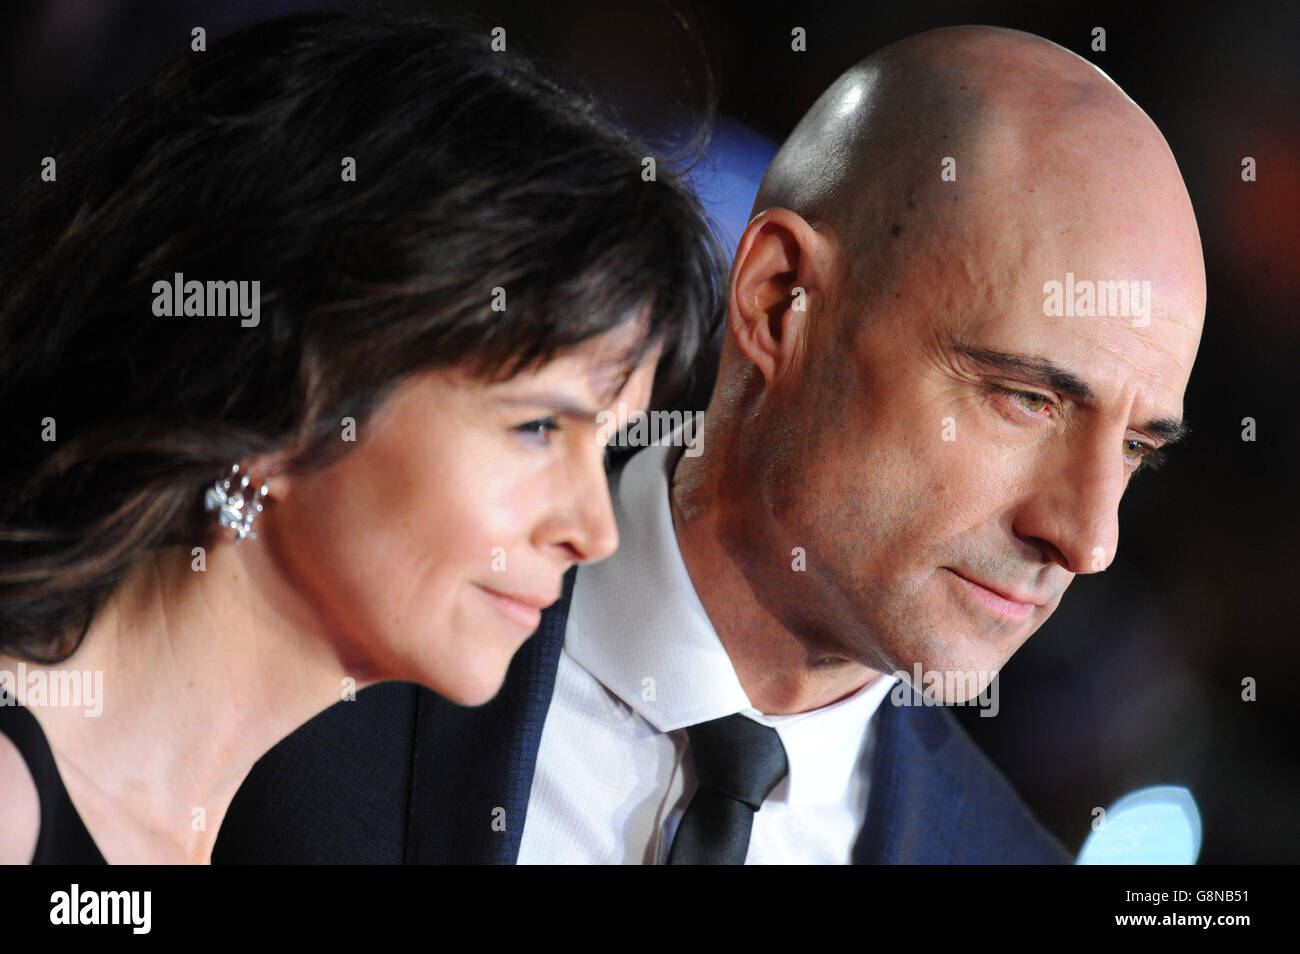 Mark Strong and Liza Marshall attending The World Premiere of Grimsby, at the Odeon Leicester Square, London. PRESS ASSOCIATION Photo. Picture date: Monday February 22, 2016. See PA Story SHOWBIZ Grimsby. Photo credit should read: Dominic Lipinski/PA Wire Stock Photo